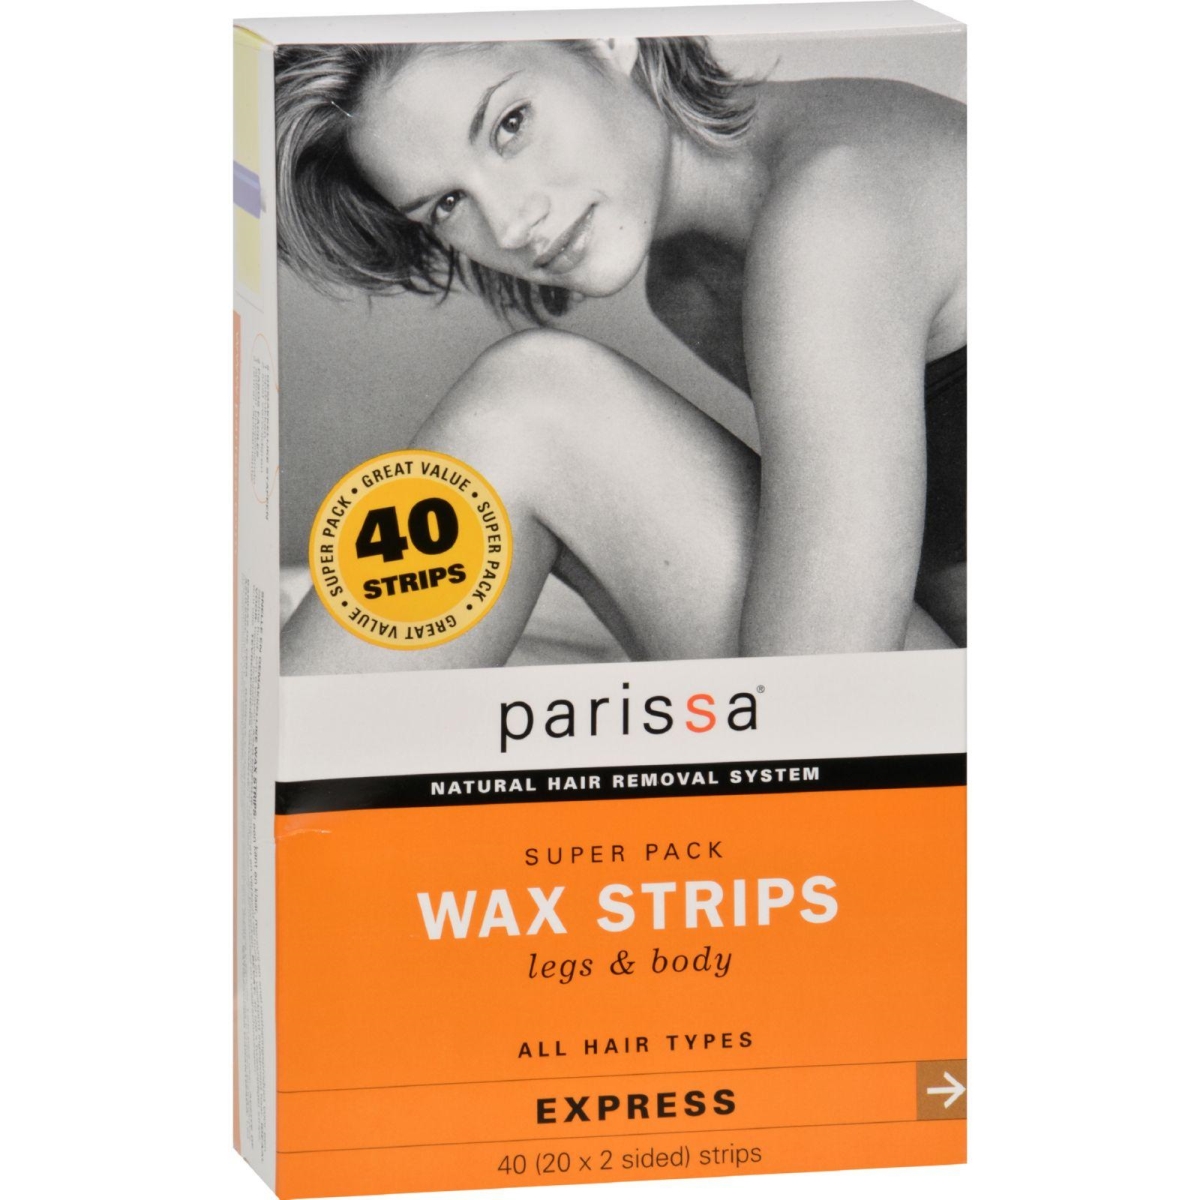 Hg1221027 Wax Strips For Legs & Body - 40 Count